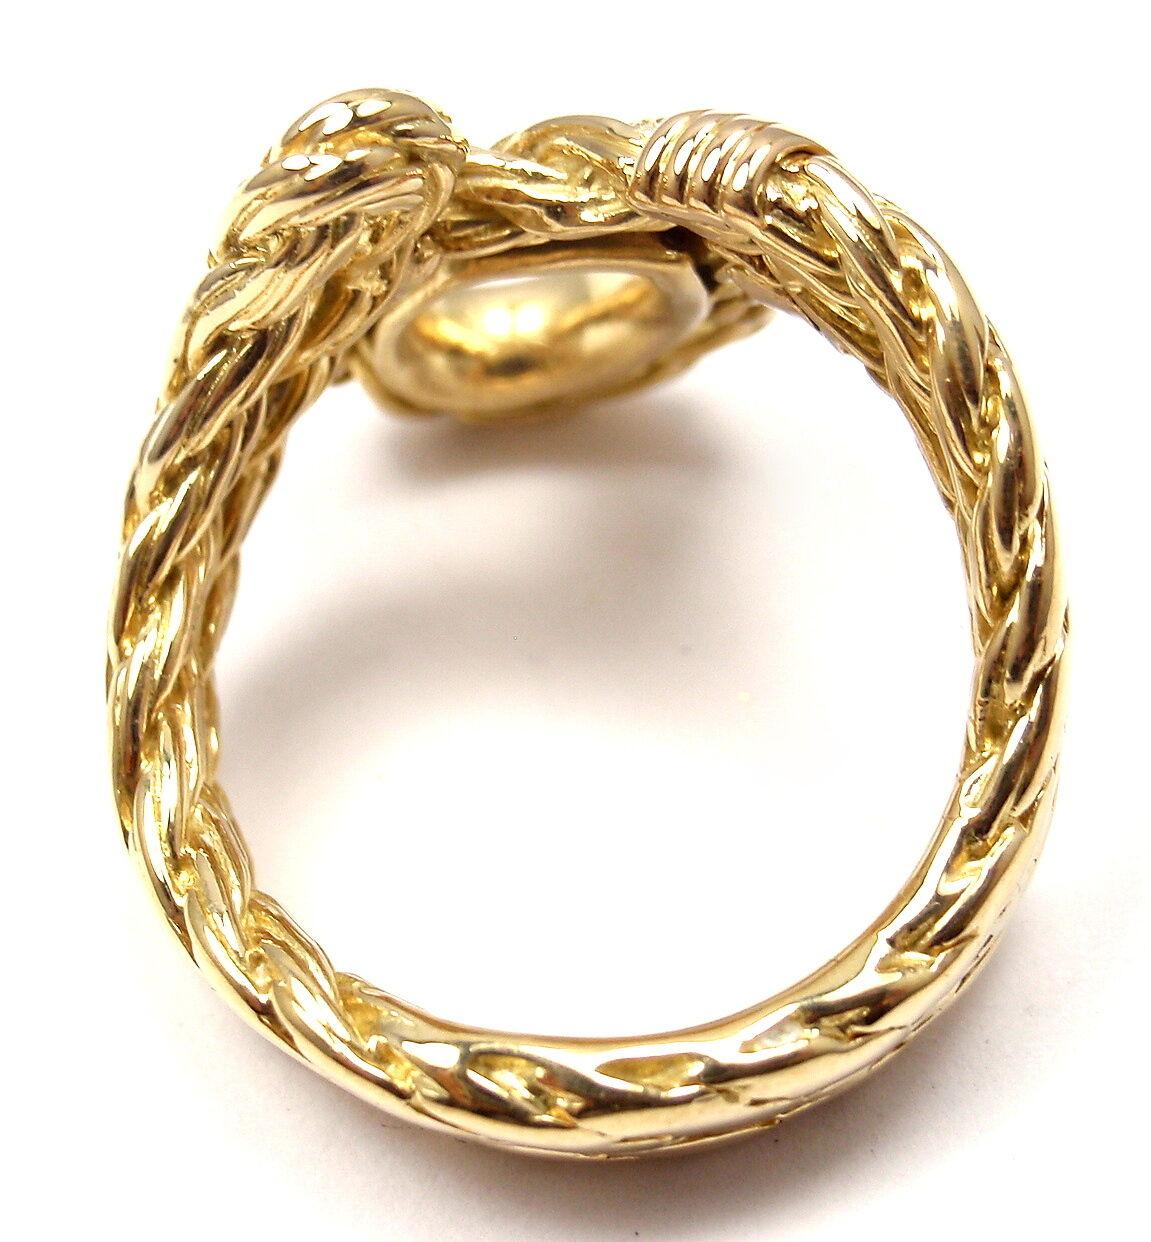 Tiffany & Co. France Yellow Gold Band Ring In Excellent Condition For Sale In Holland, PA